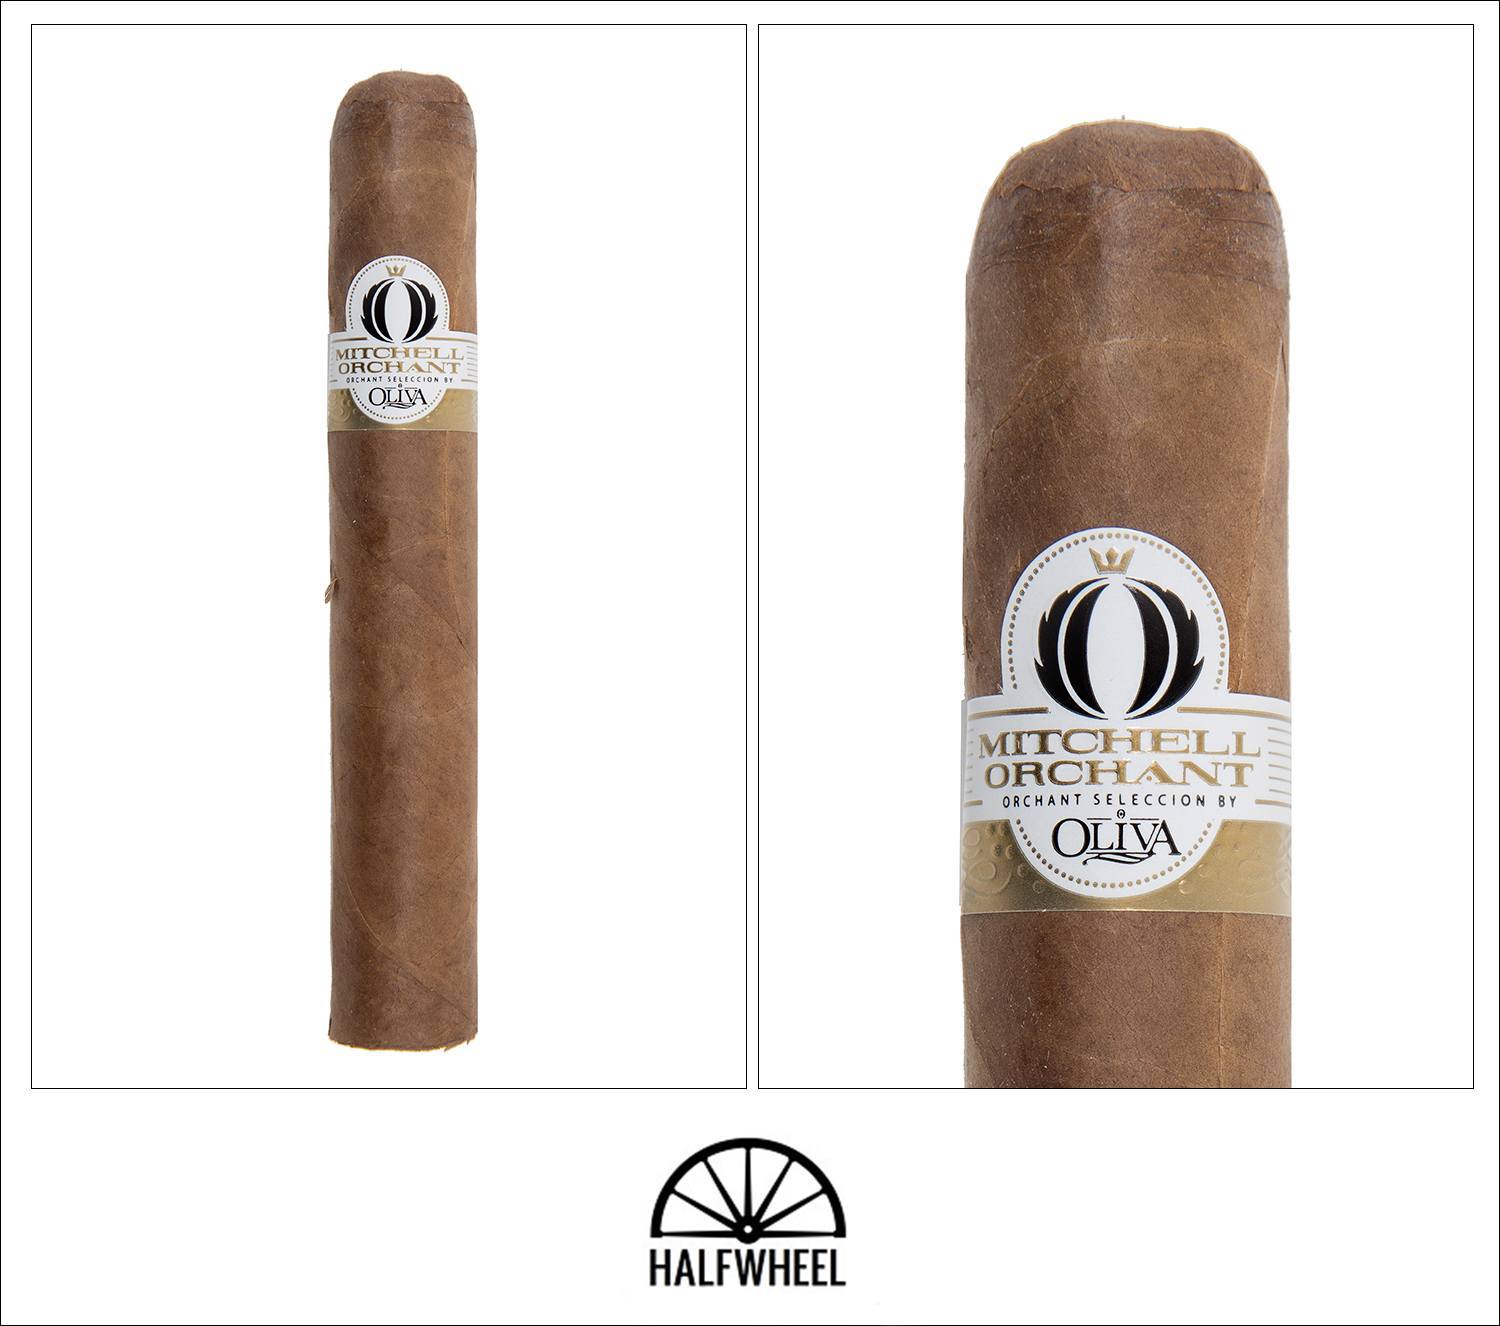 Orchant Seleccion by Oliva Shorty 1